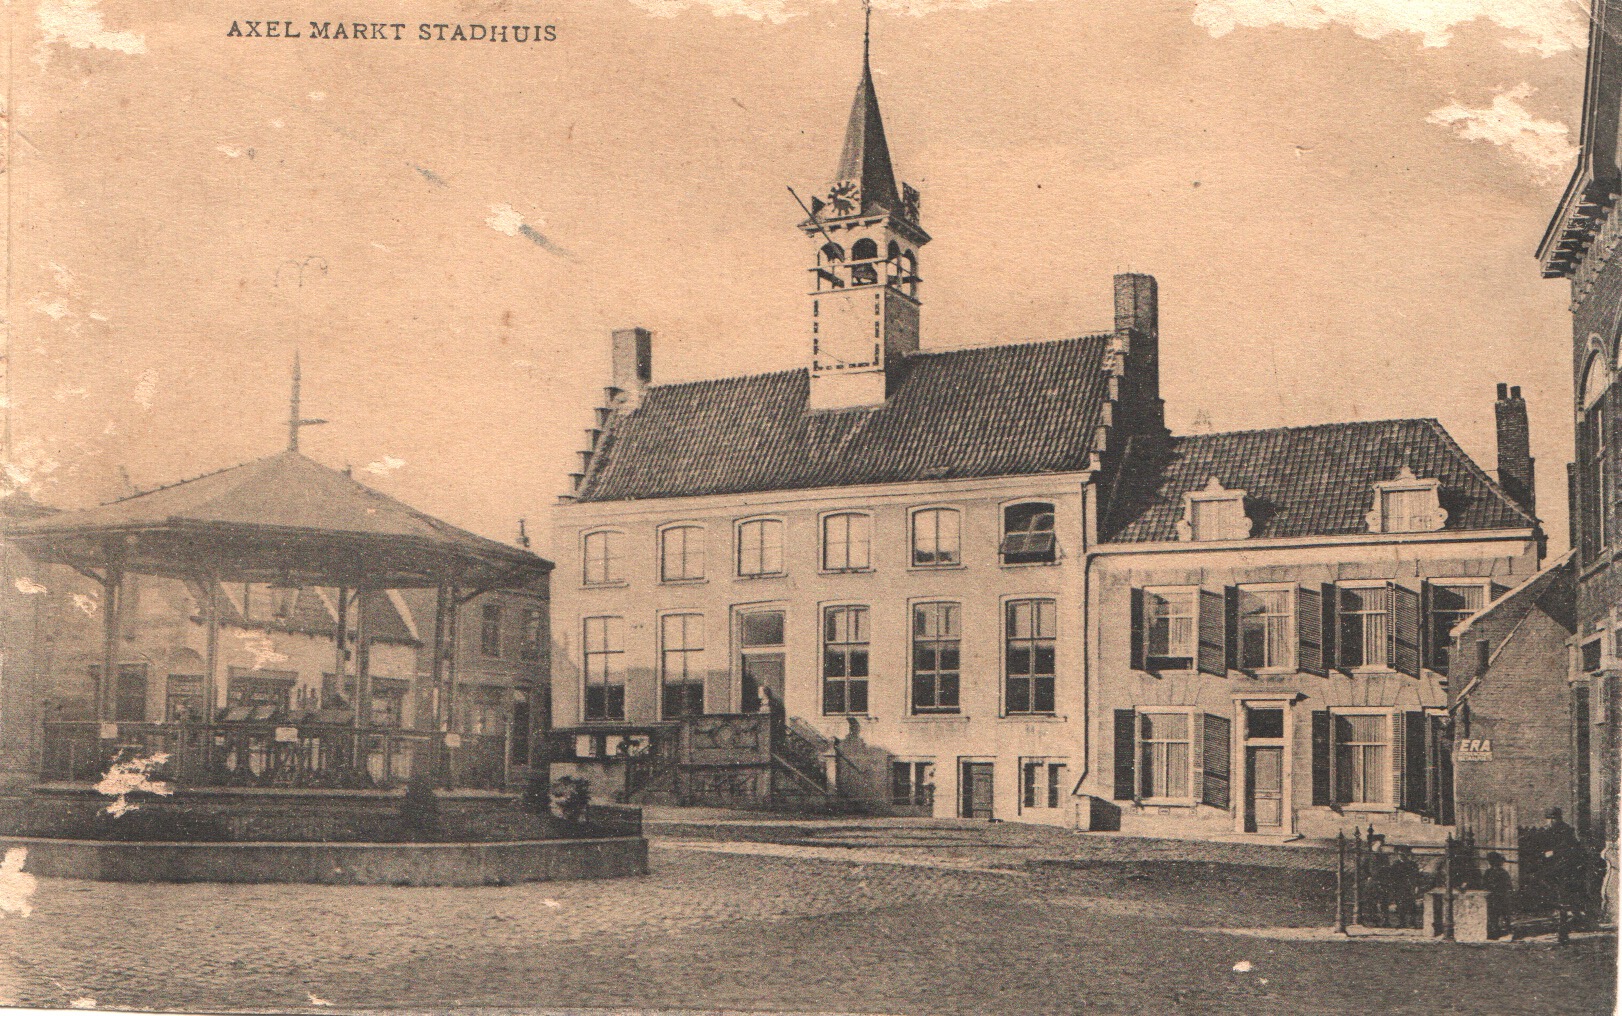 Town hall and rectory Axel, circa 1900. They were demolished in 1939.